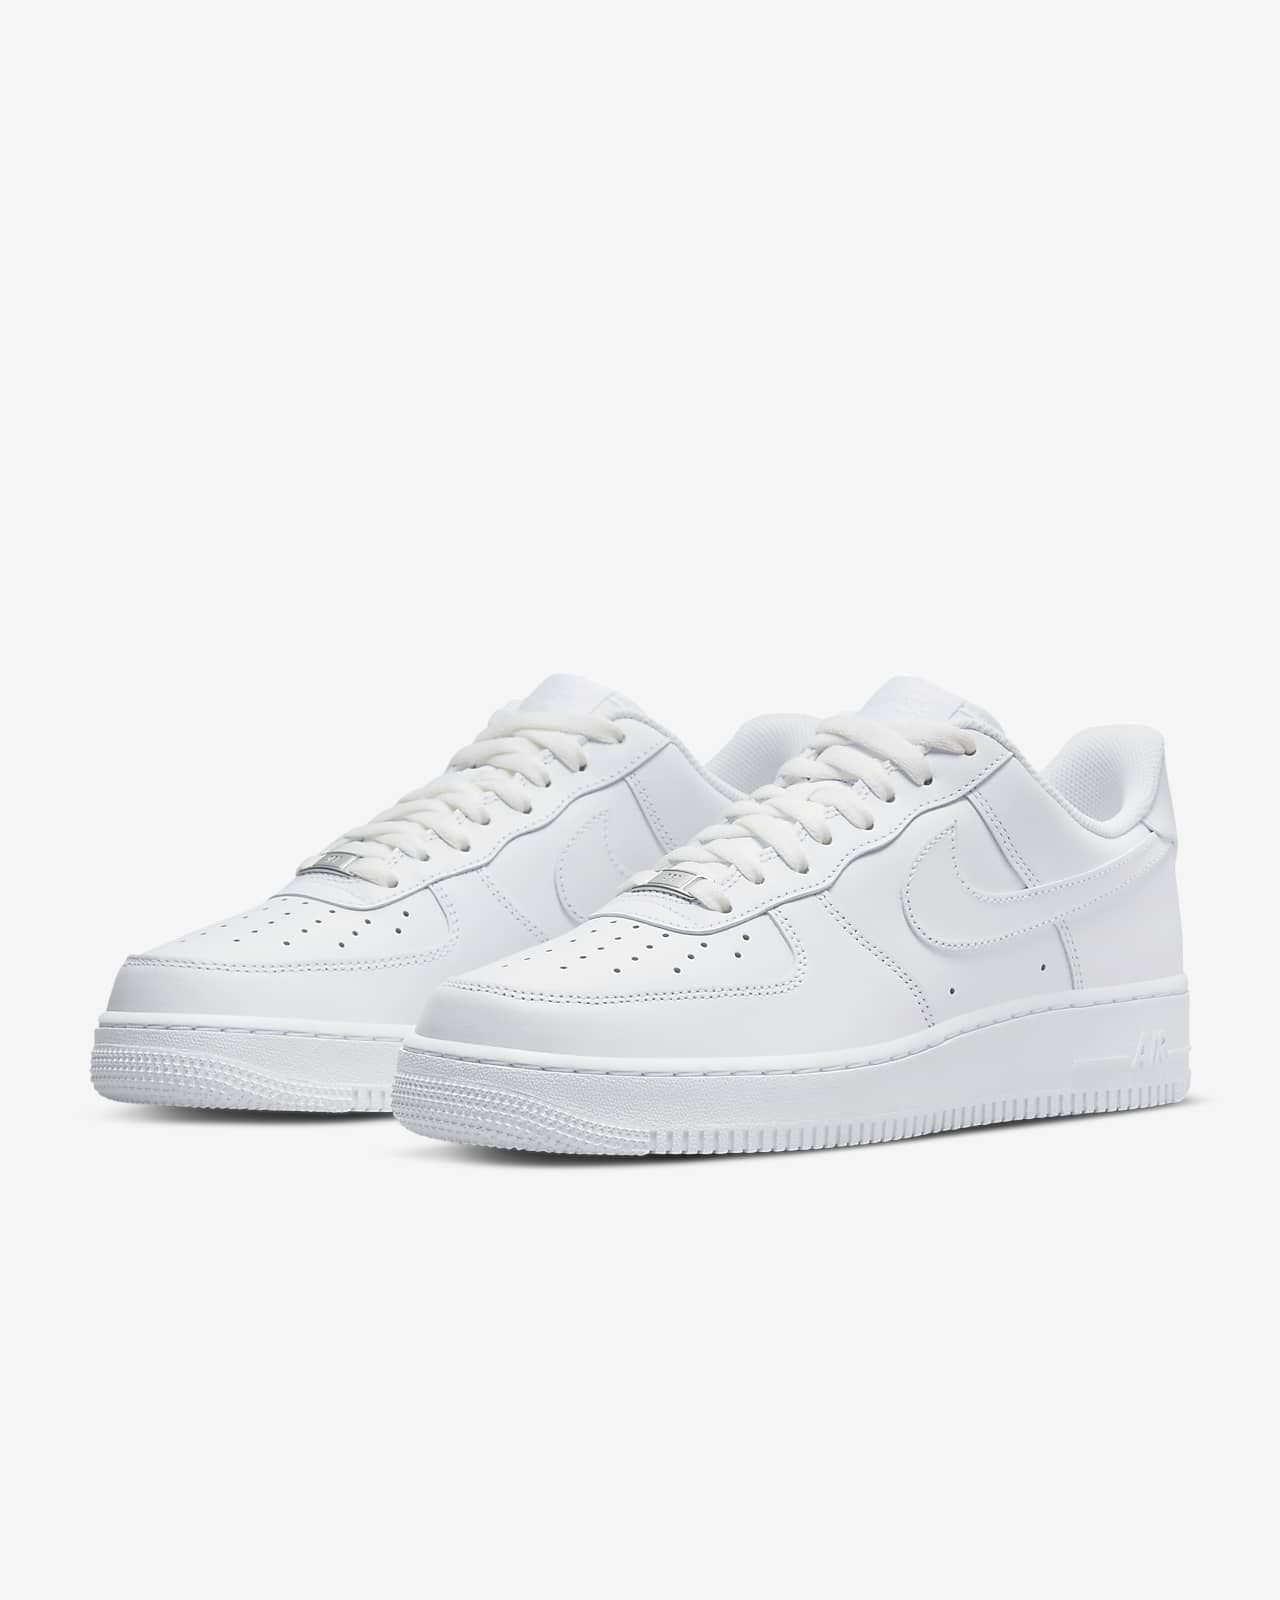 Nike Air Force 1 '07 LV8 Shoes